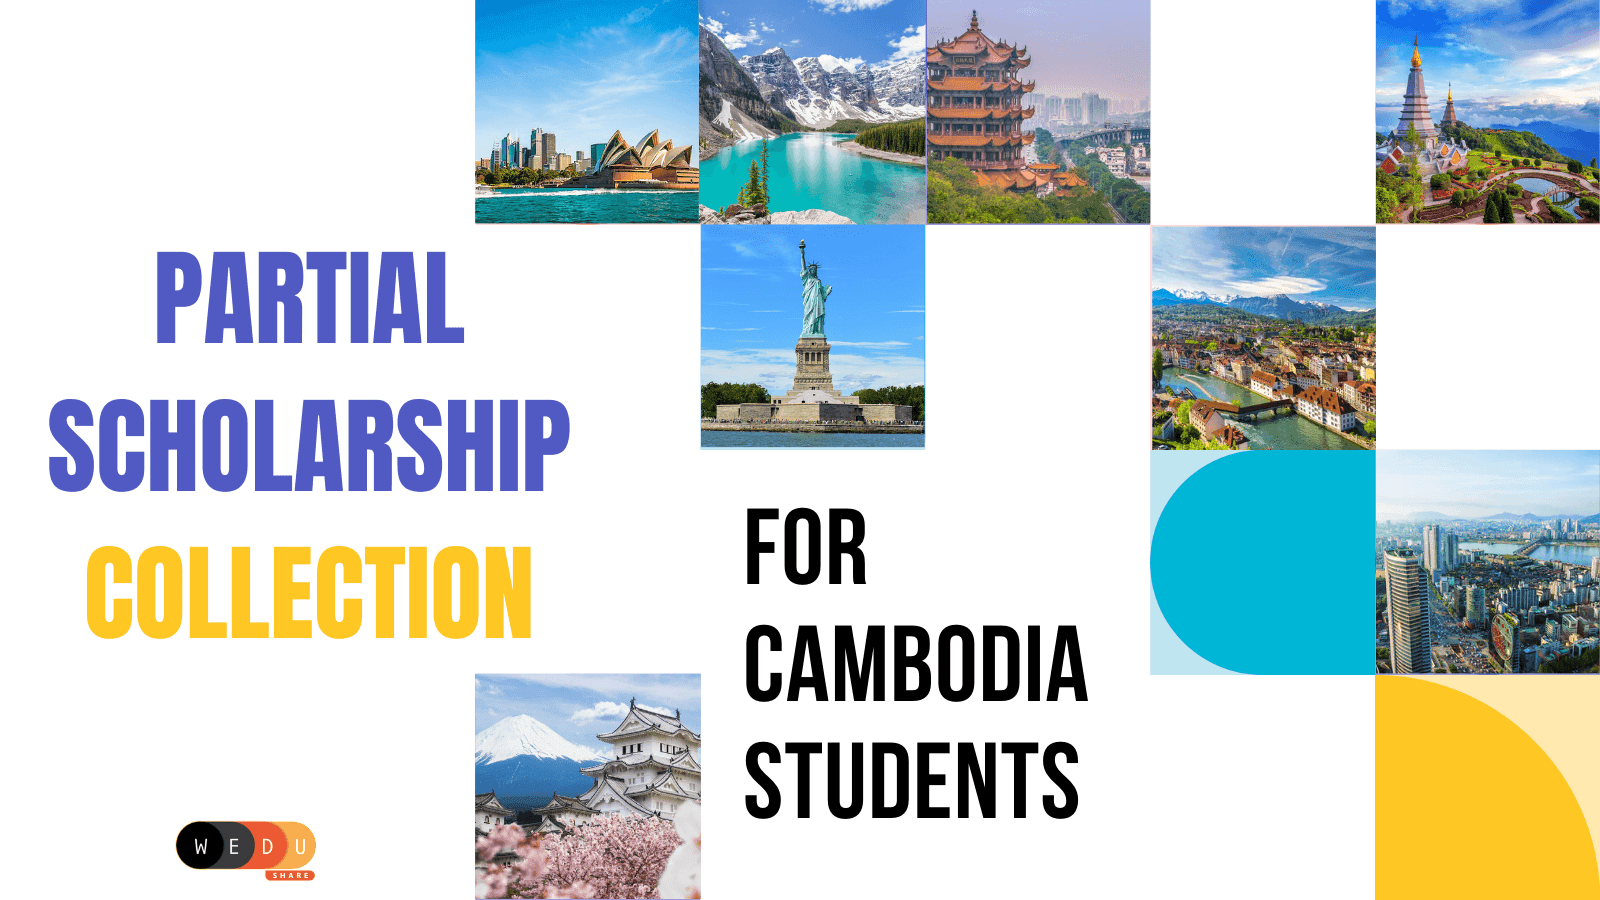 Partial Scholarship Collection for Cambodian Students